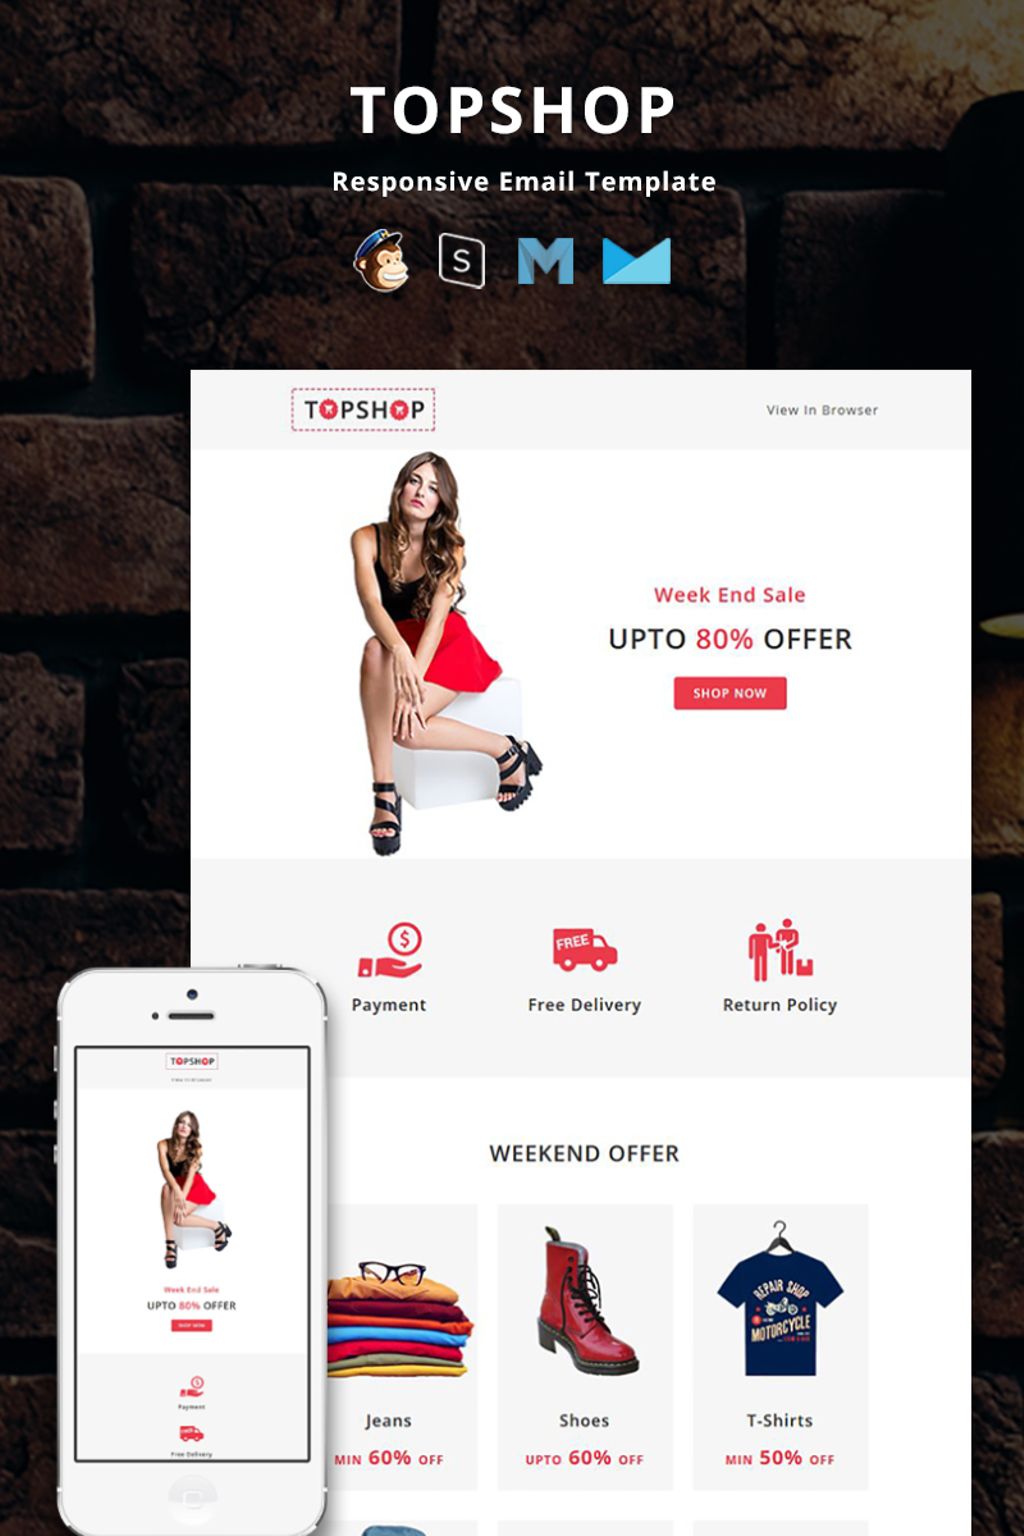 TopShop - Responsive Email Newsletter Template